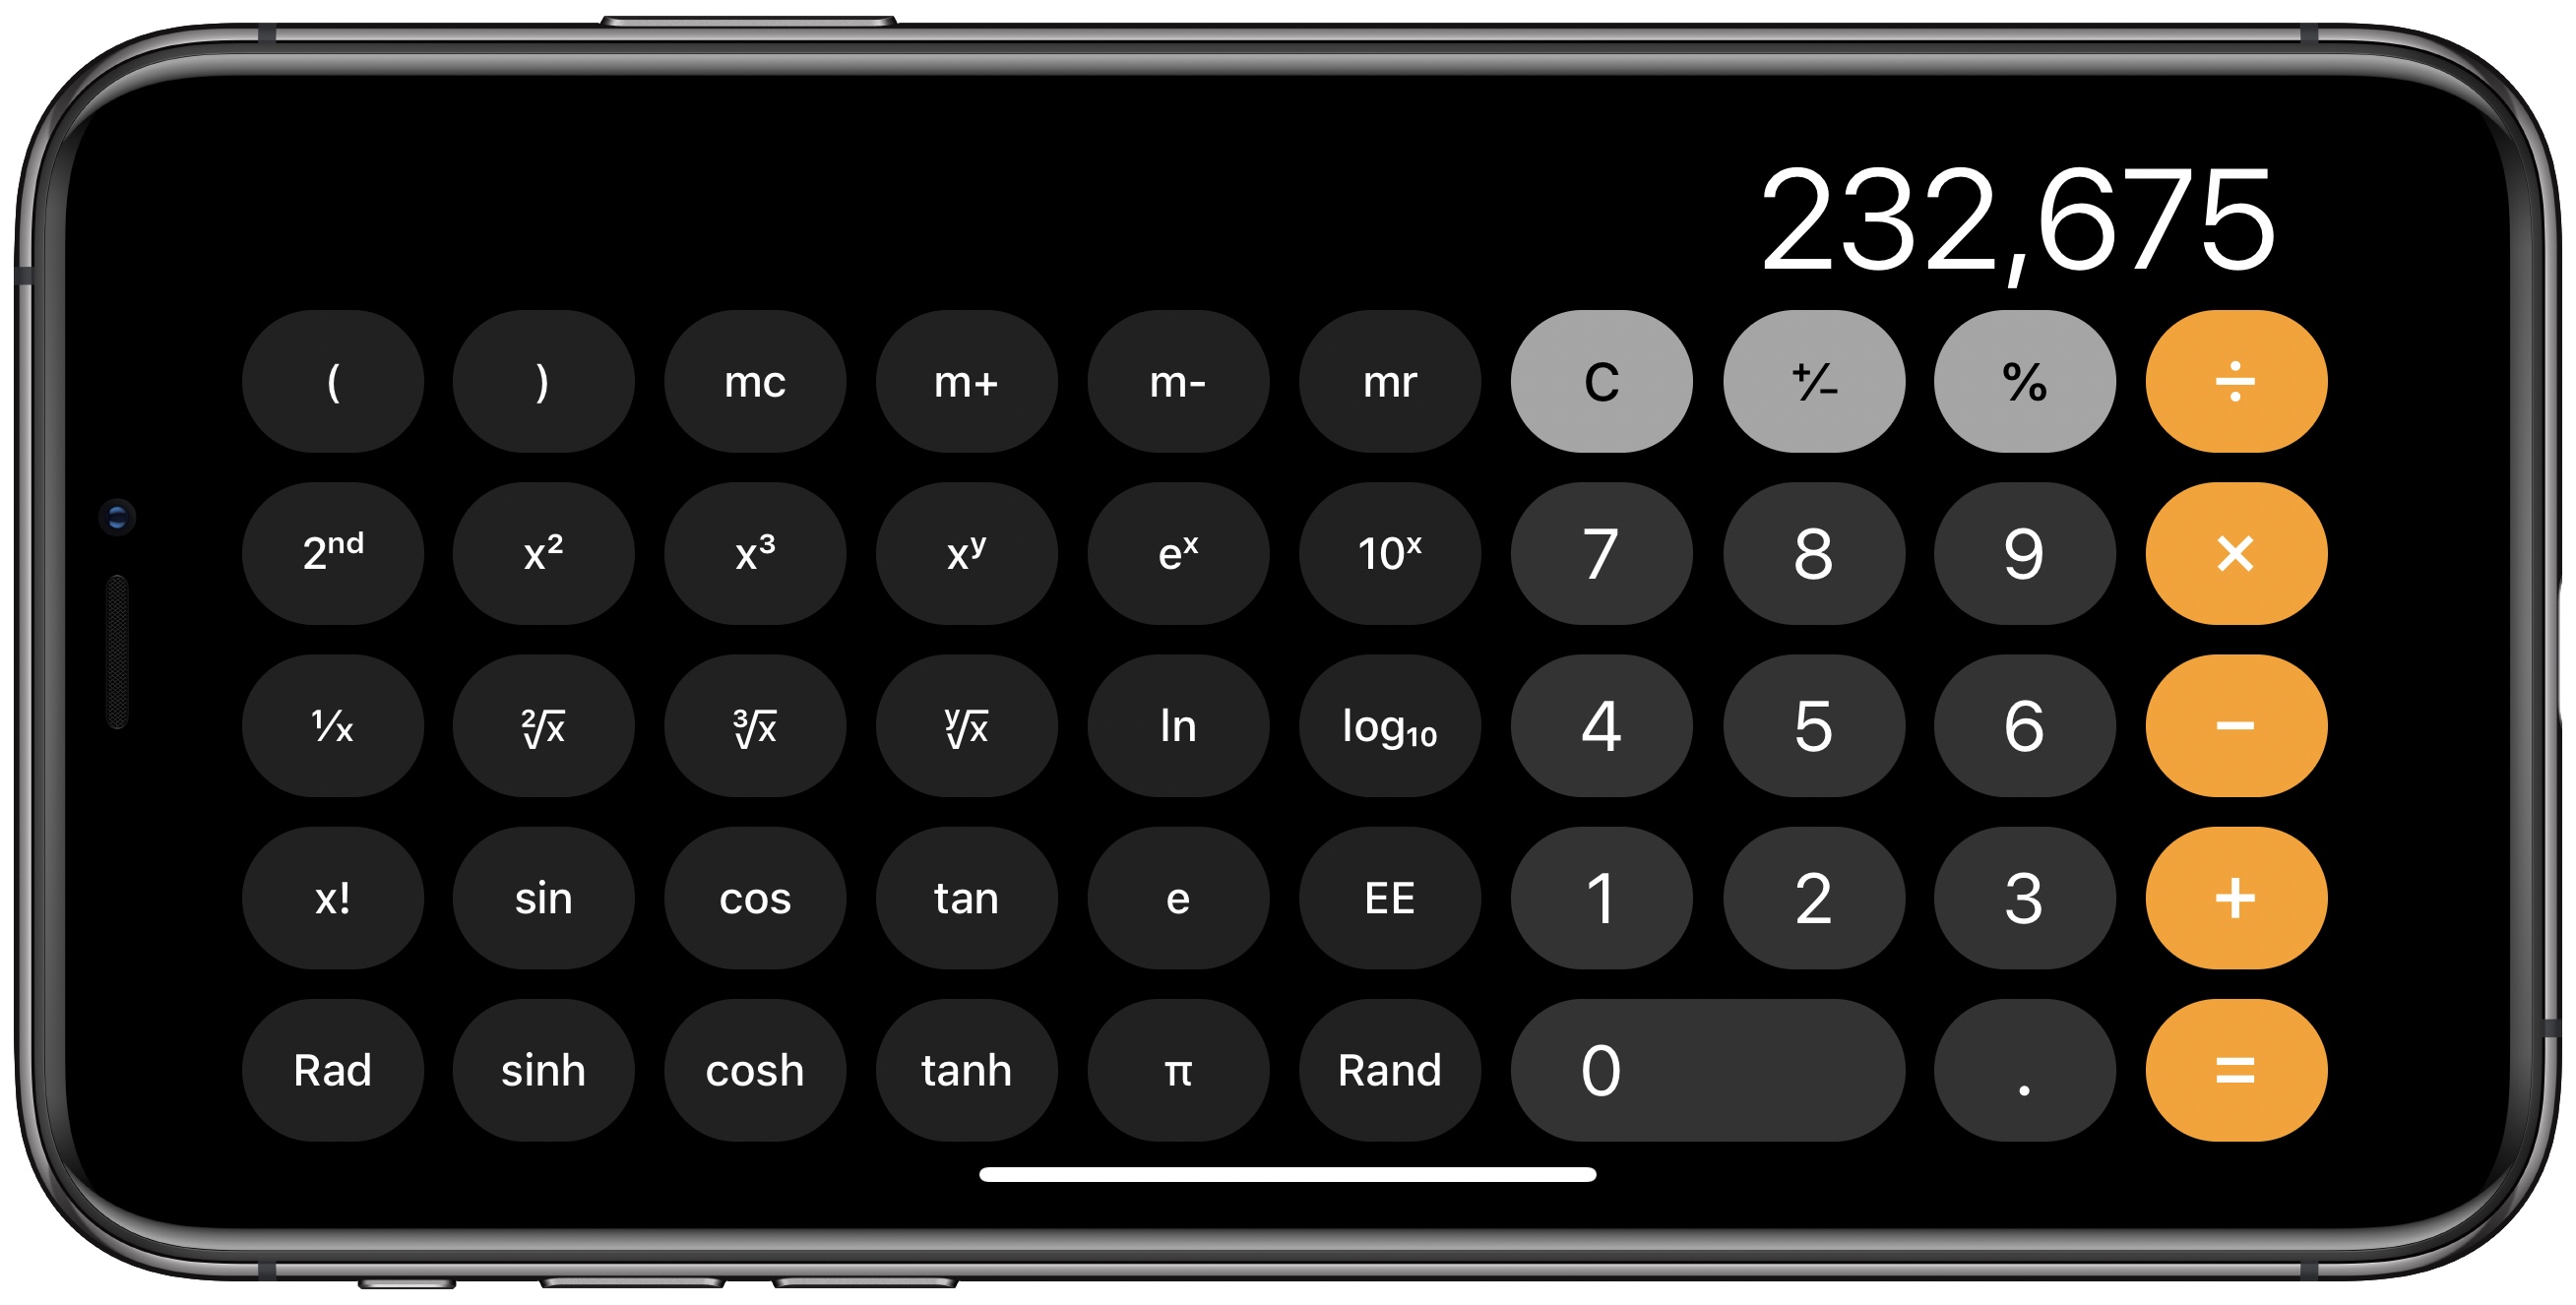 How To Use The IPhone Calculator